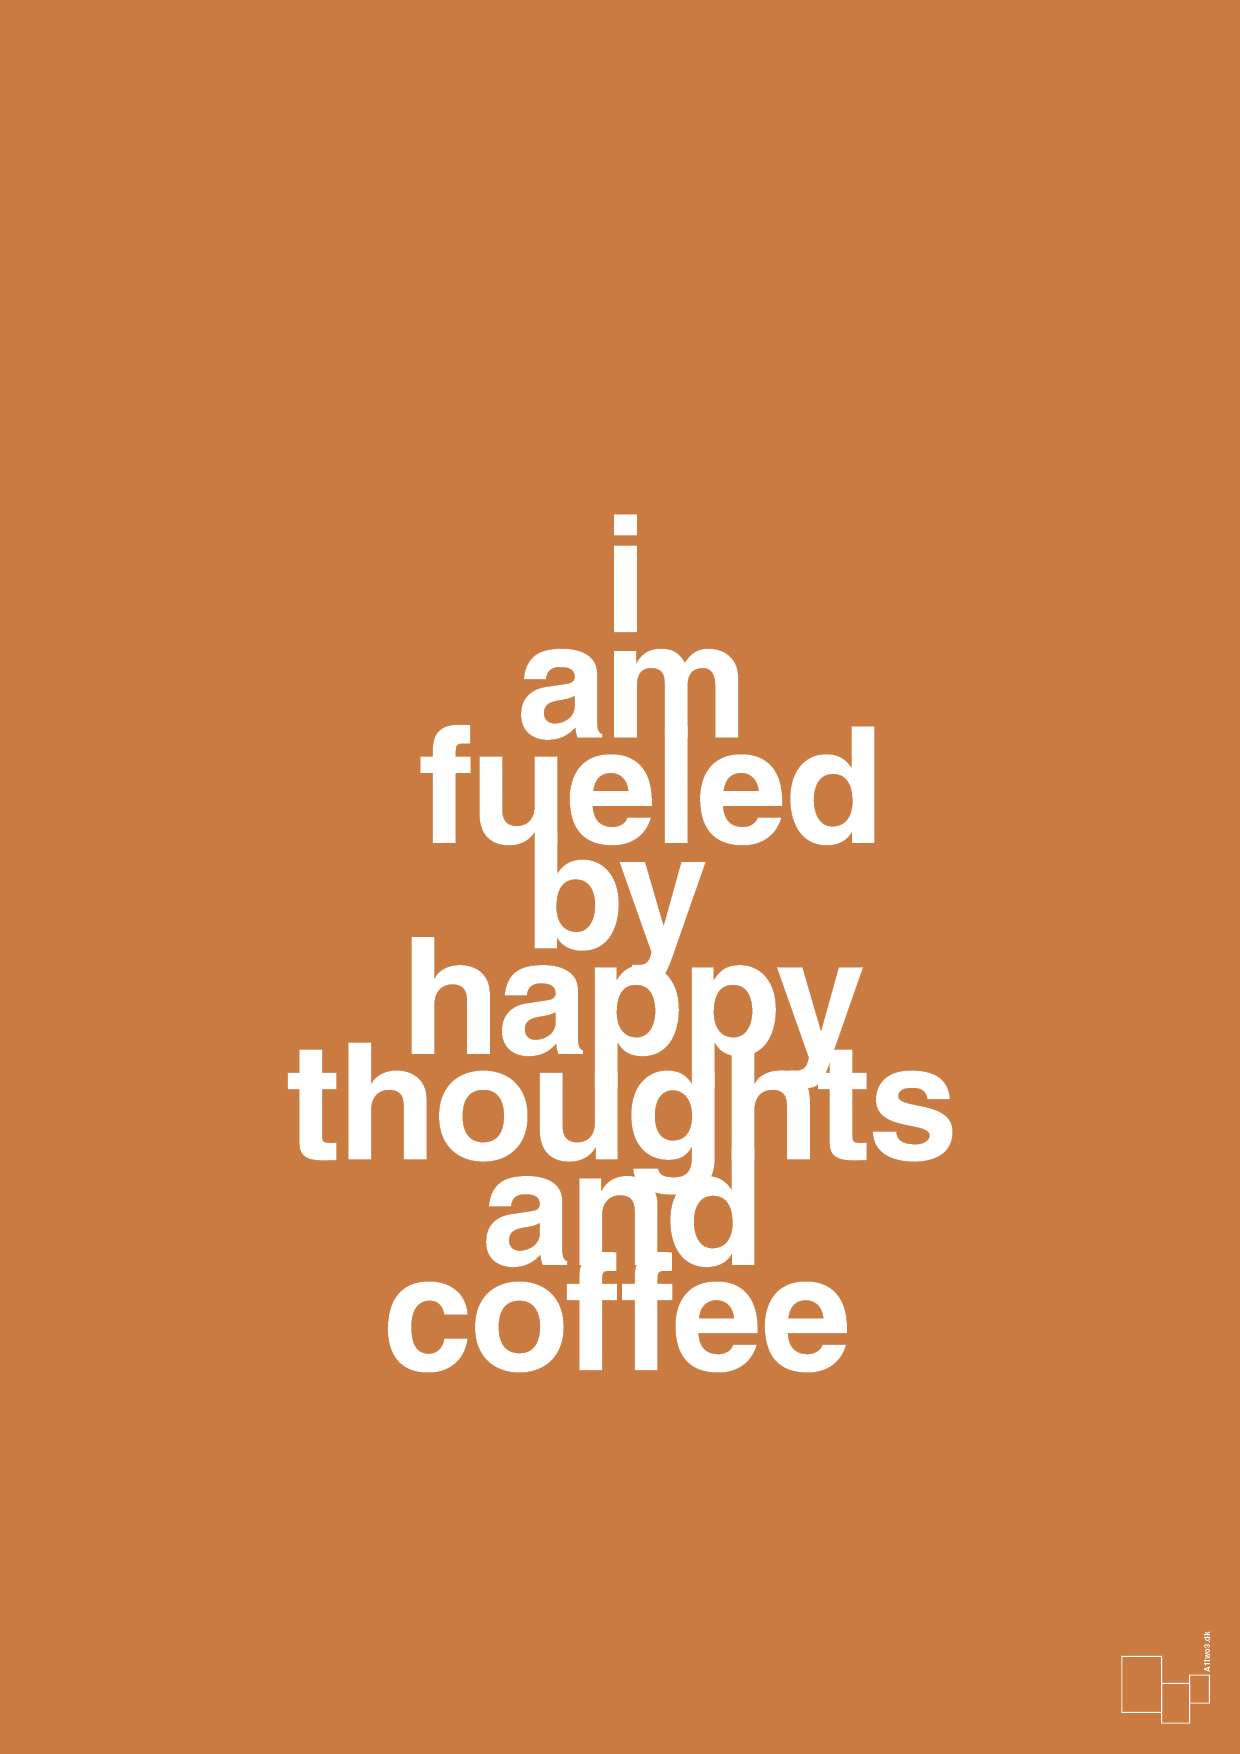 i am fueled by happy thoughts and coffee - Plakat med Mad & Drikke i Rumba Orange